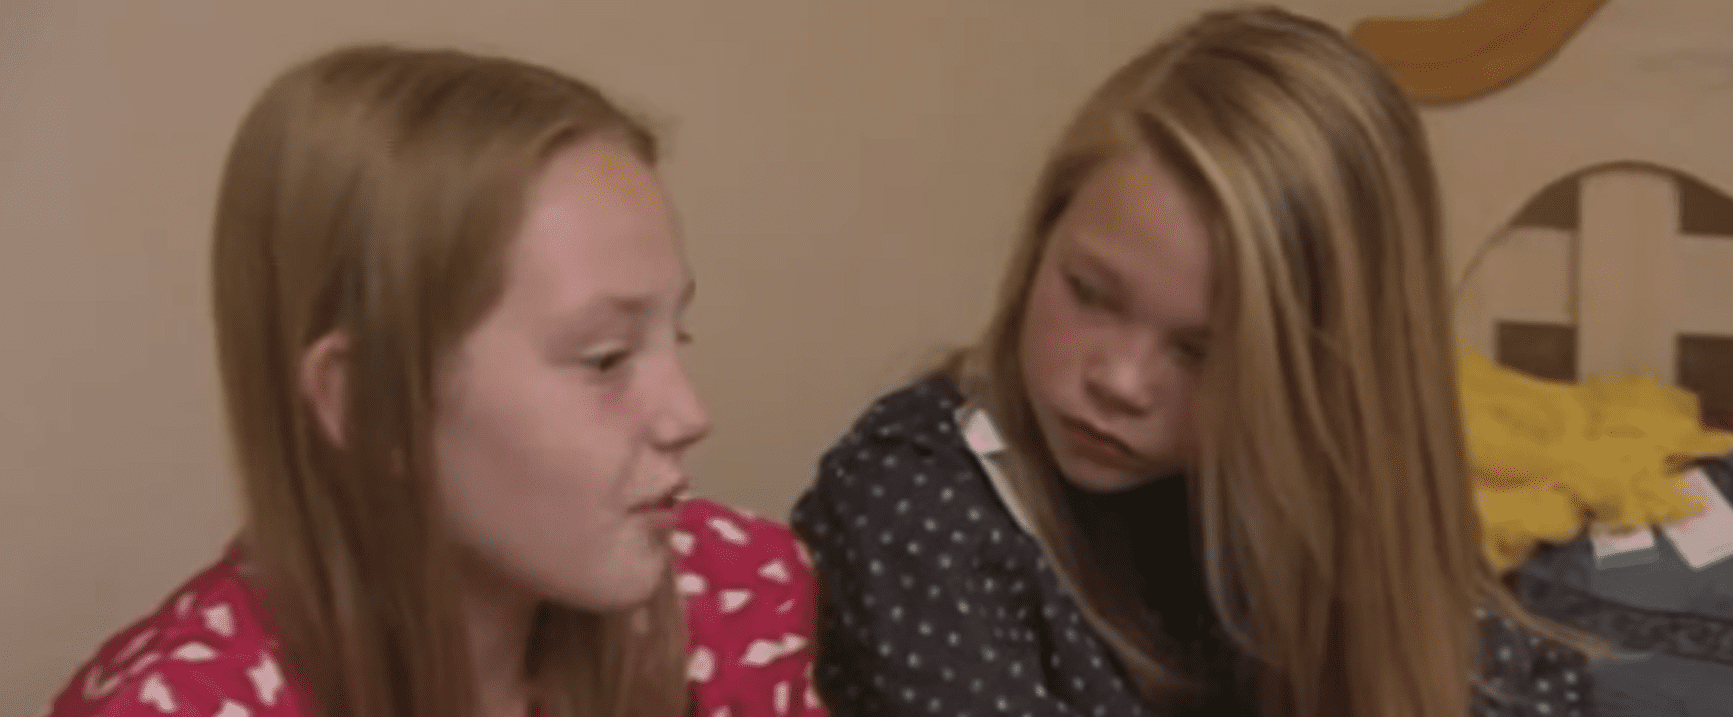 Kaylee and the girl she bullied, from a video dated May 23, 2013 | Source: youtube.com/ABCNews